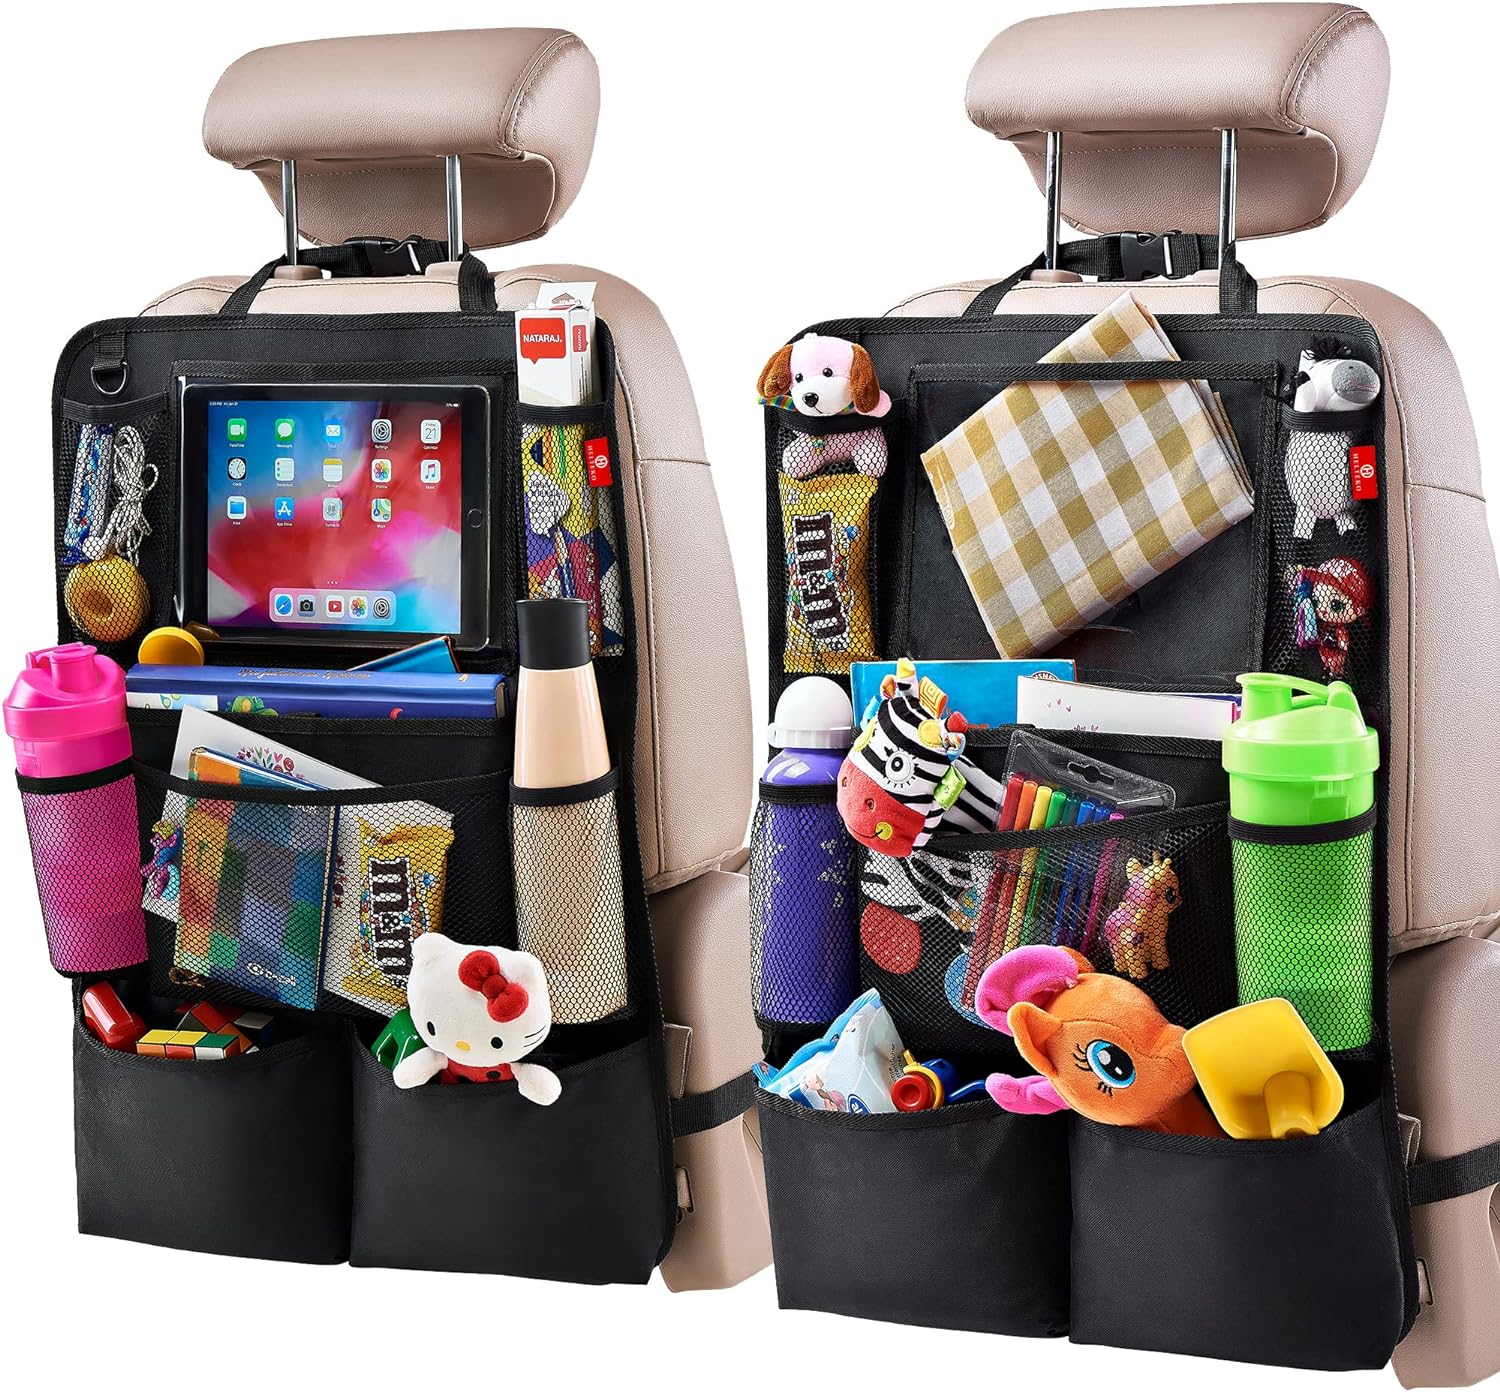 Helteko Backseat Car Organizer, Kick Mats Back Seat Protector with Touch Screen Tablet Holder, Back Seat Organizer for Kids, Travel Accessories with 9 Storage Pockets 2 Pack, Black